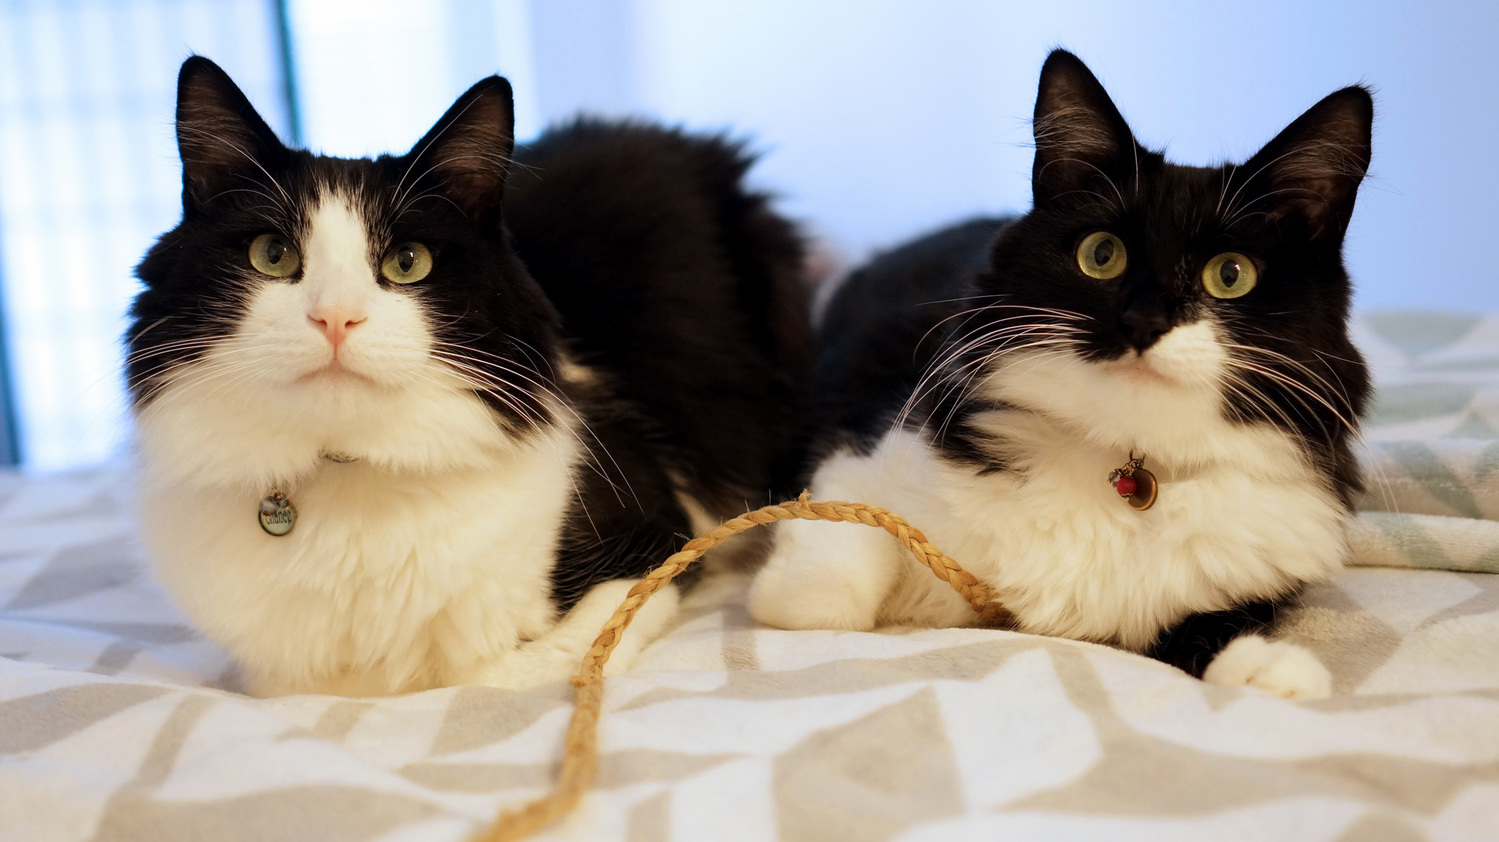 Chance the dapper and classy sassy tuxedo friends til the end.